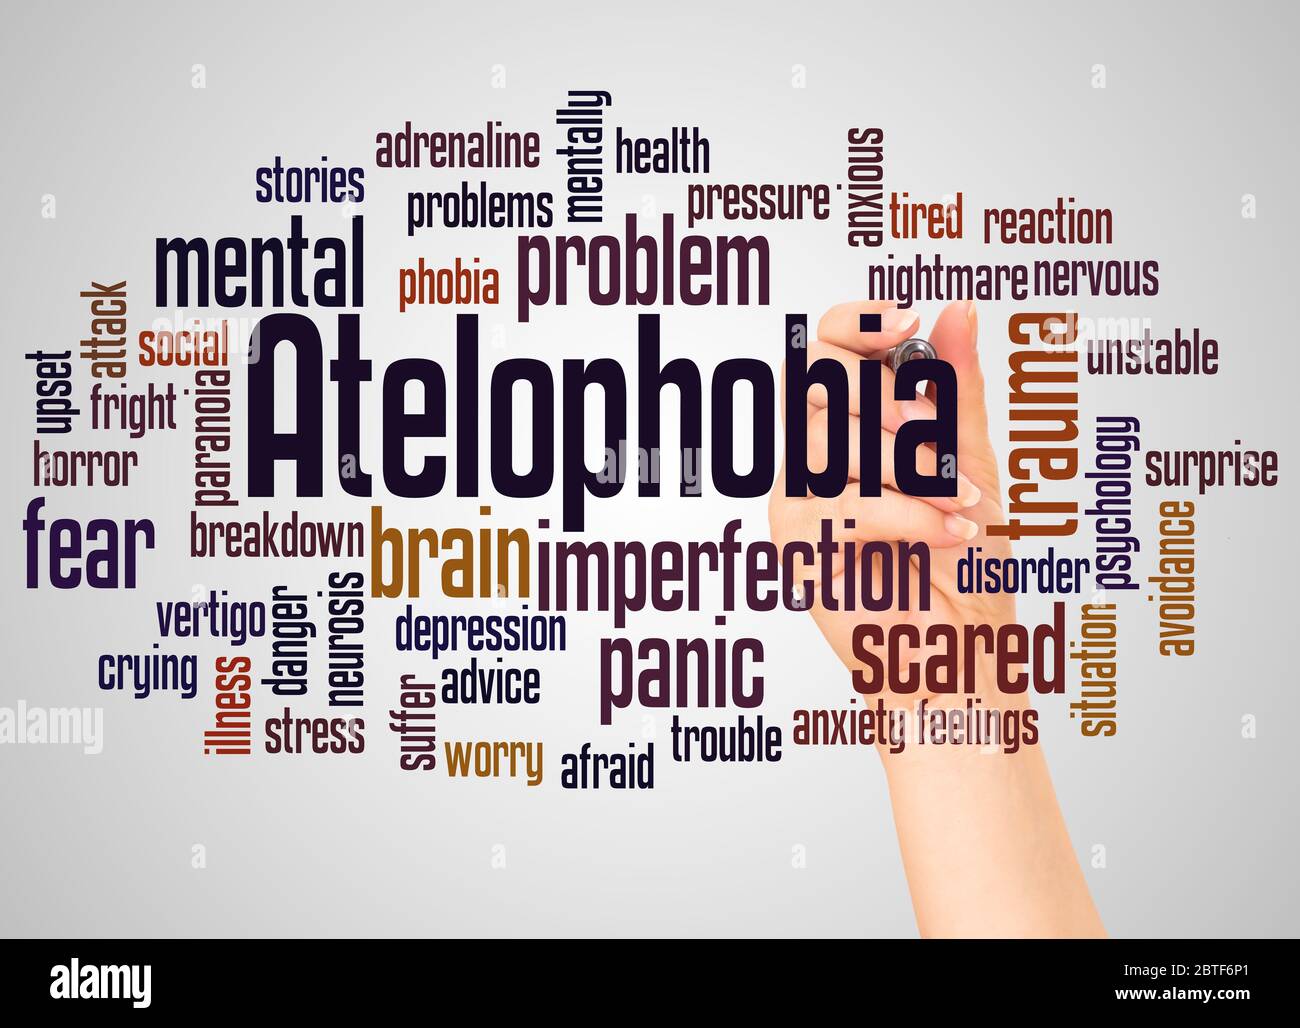 Atelophobia fear of imperfection word cloud and hand with marker ...